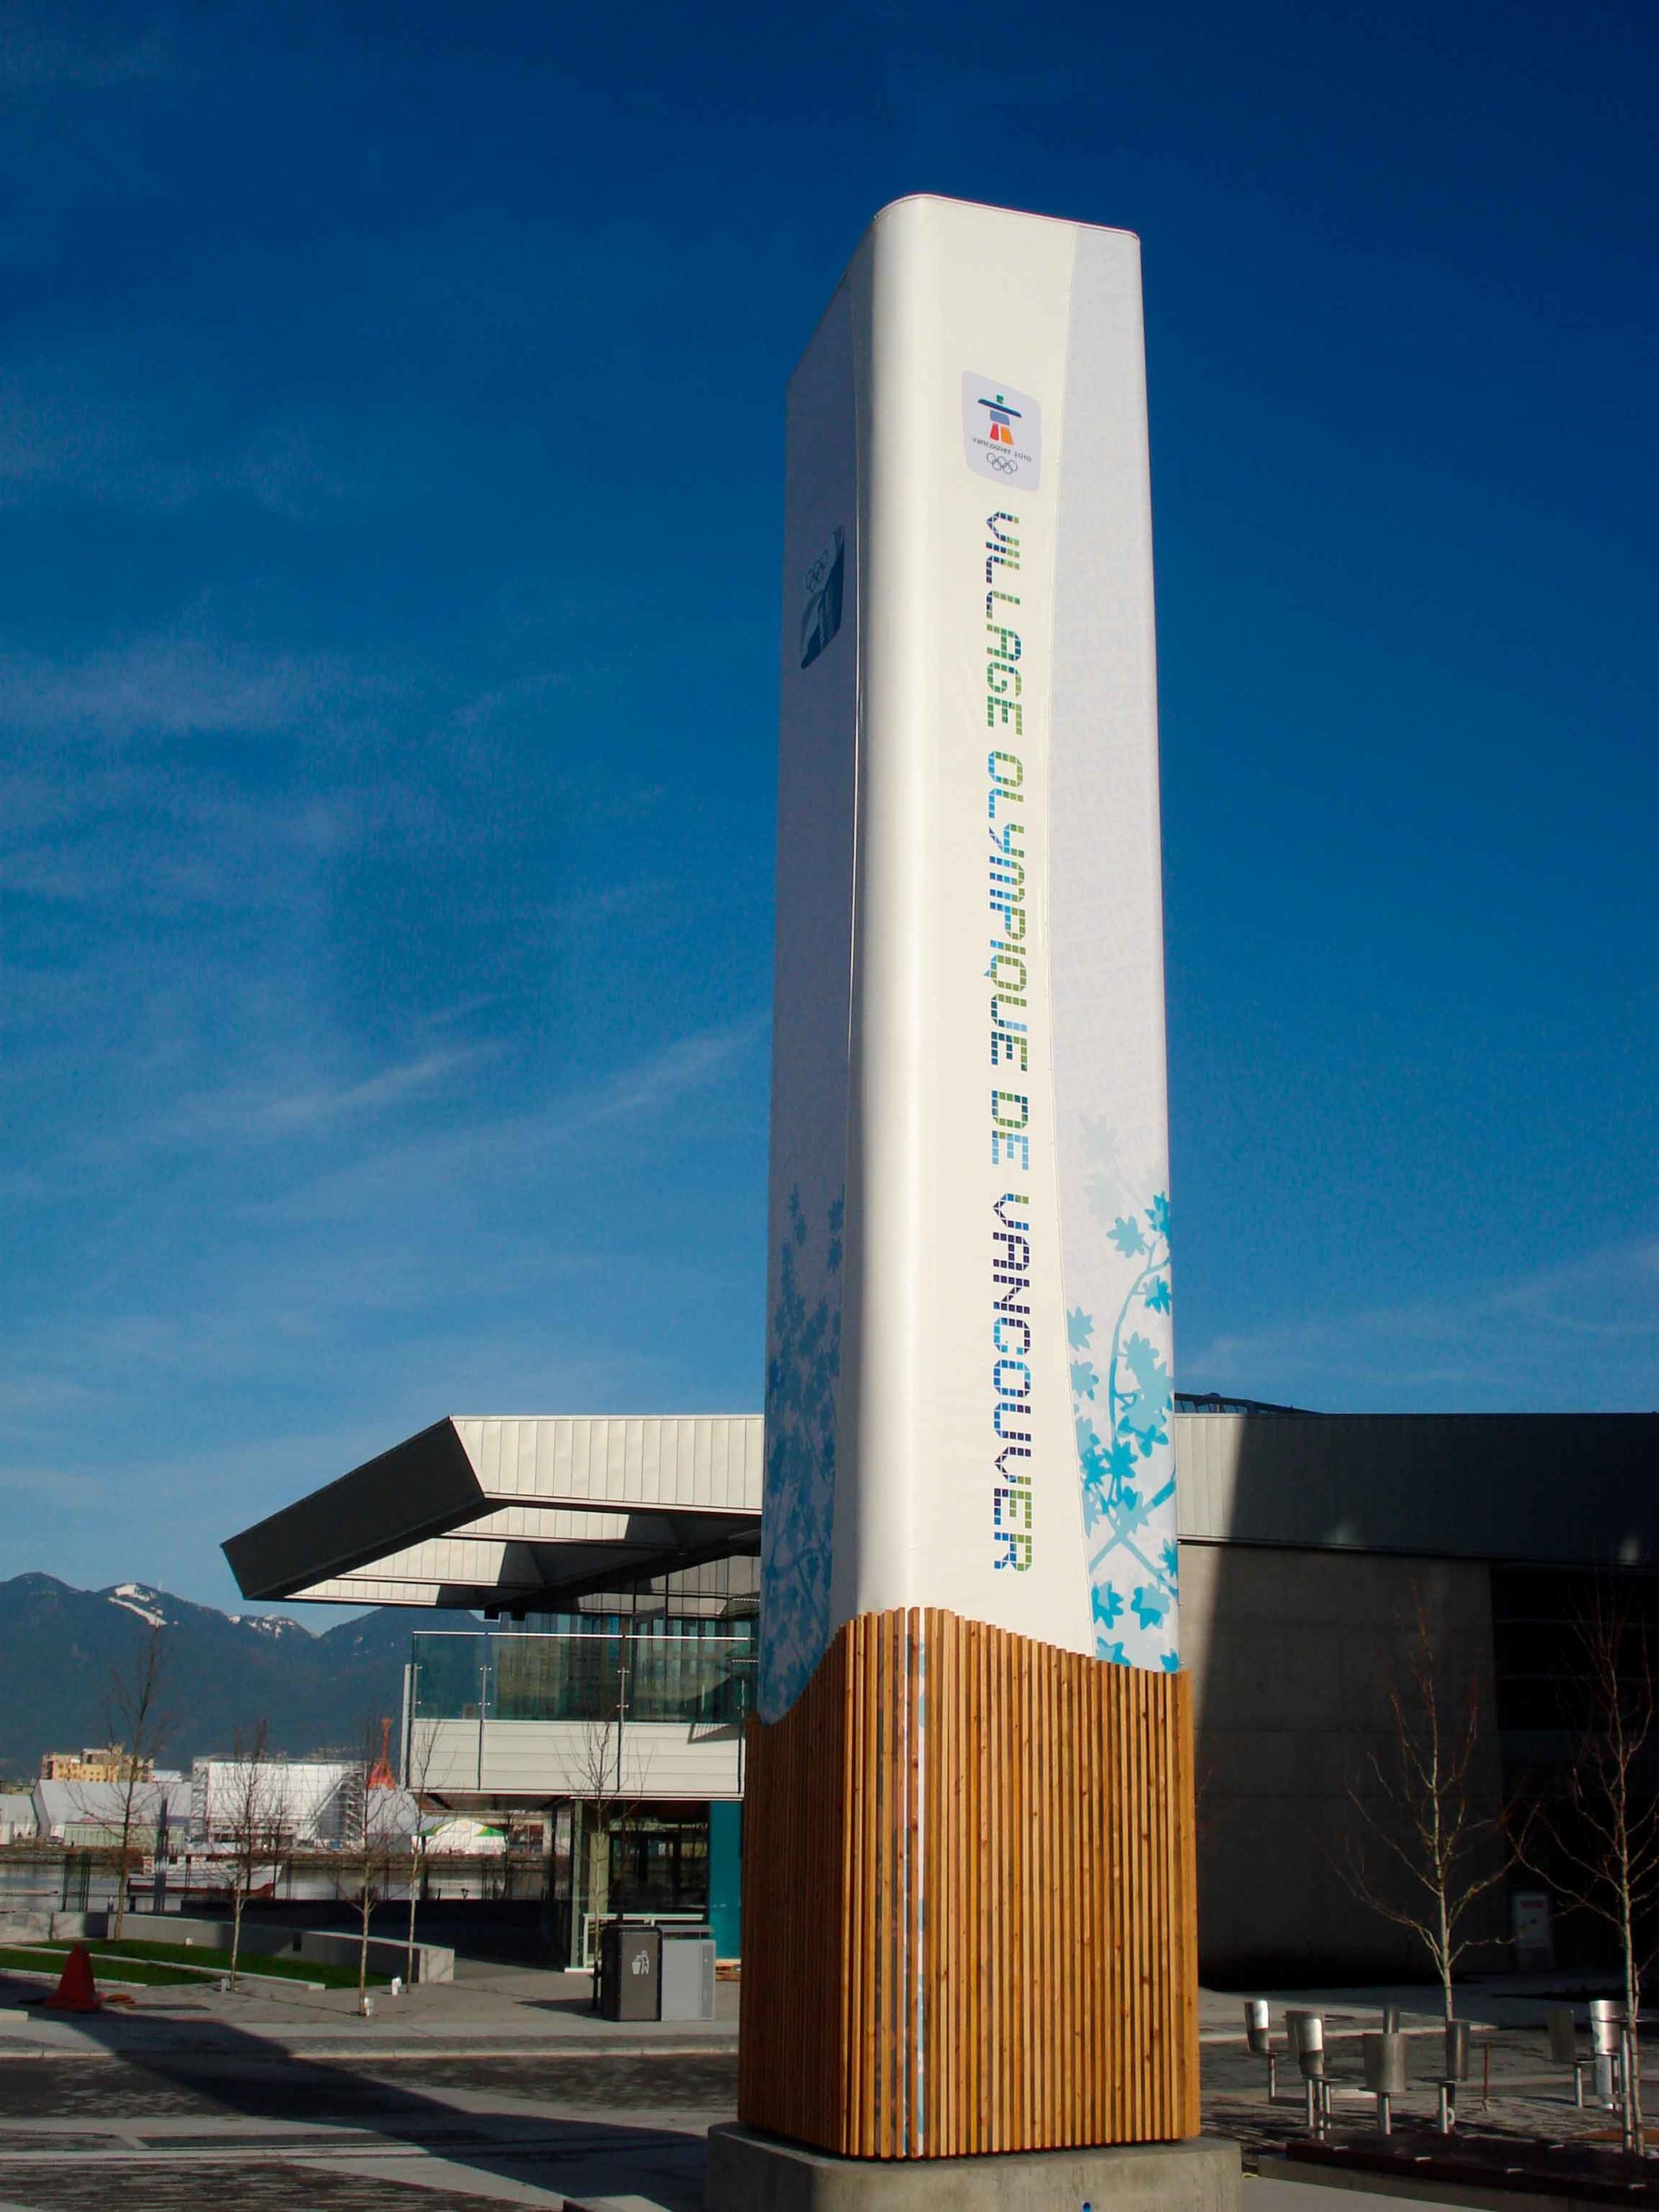 wayfinding signs tower large scale for the olympics